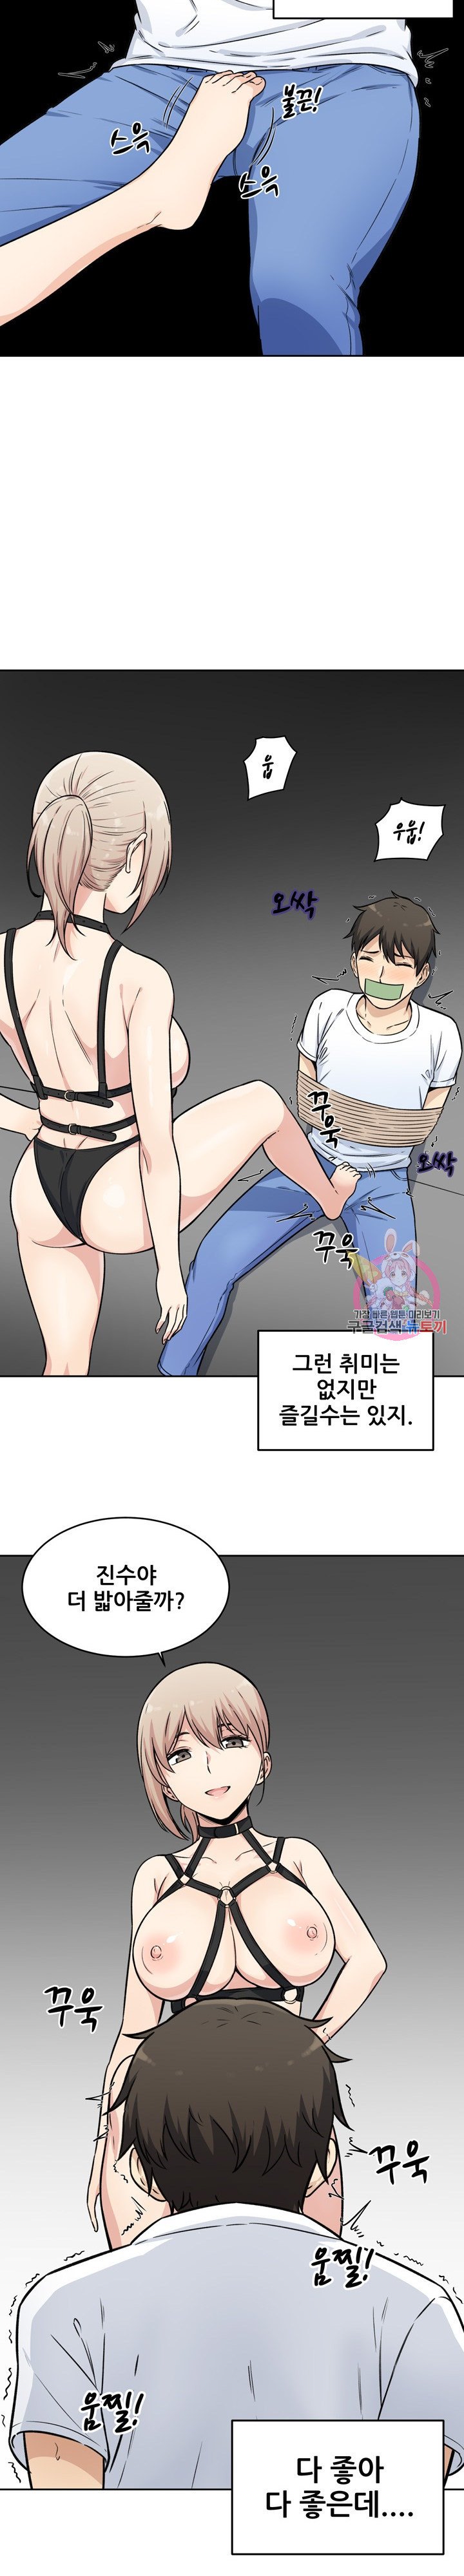 the-ark-is-me-raw-chap-34-2